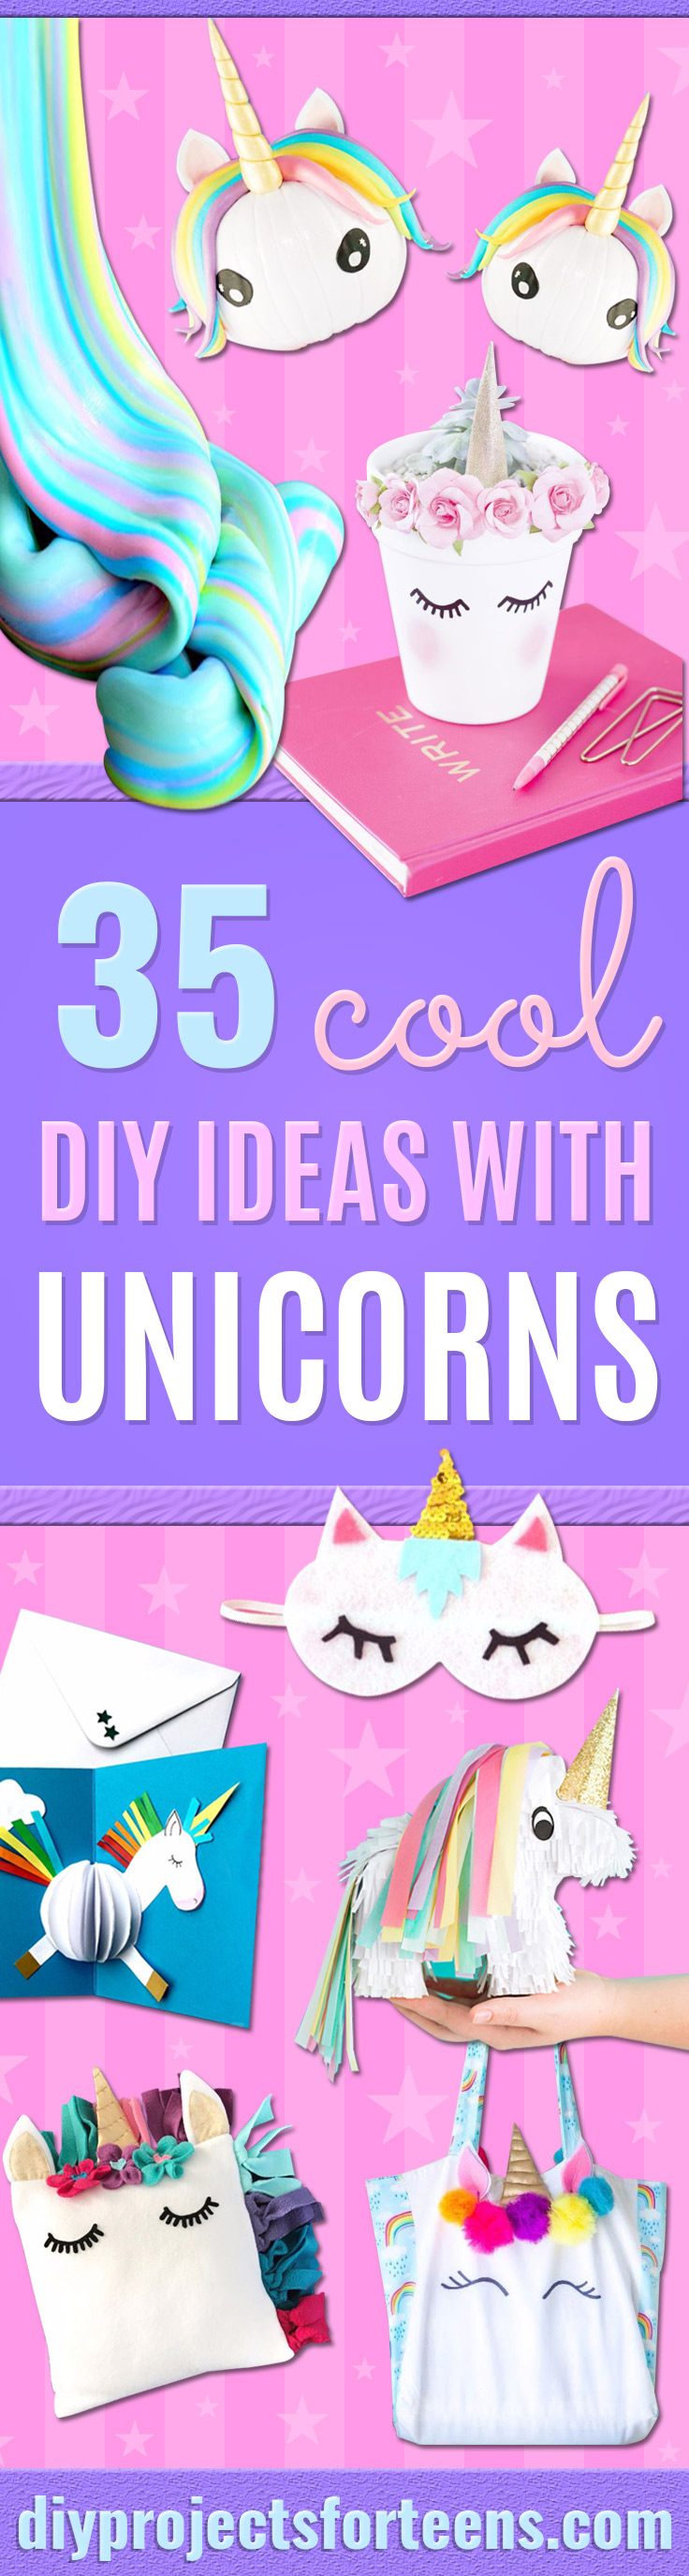 20 DIY Crafts With Unicorns   DIY Projects for Teens